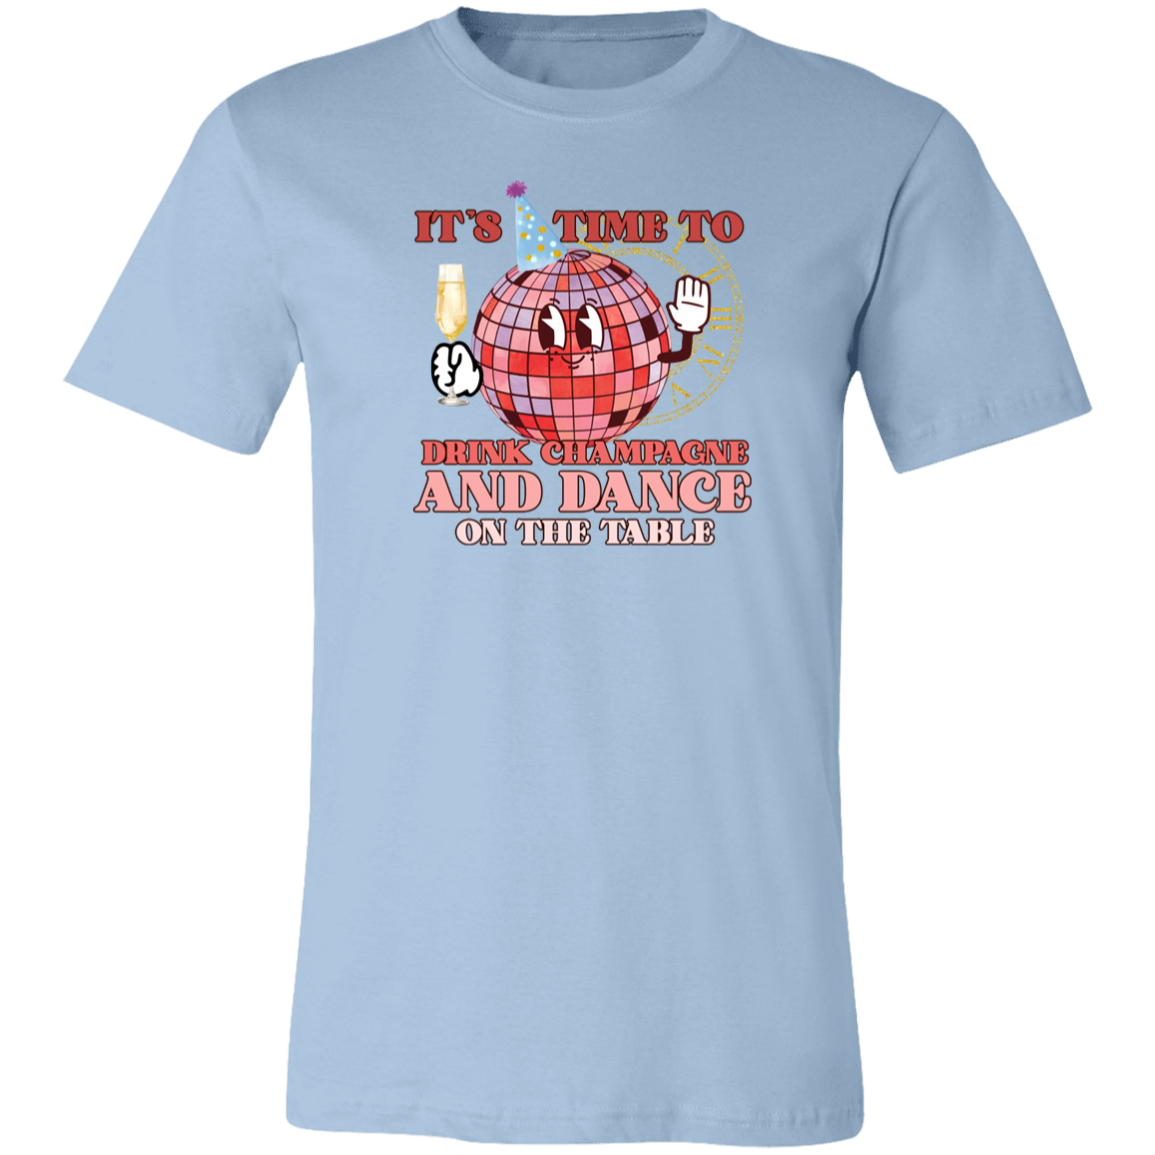 It's Time To Drink Champagne & Dance on the Table Shirt